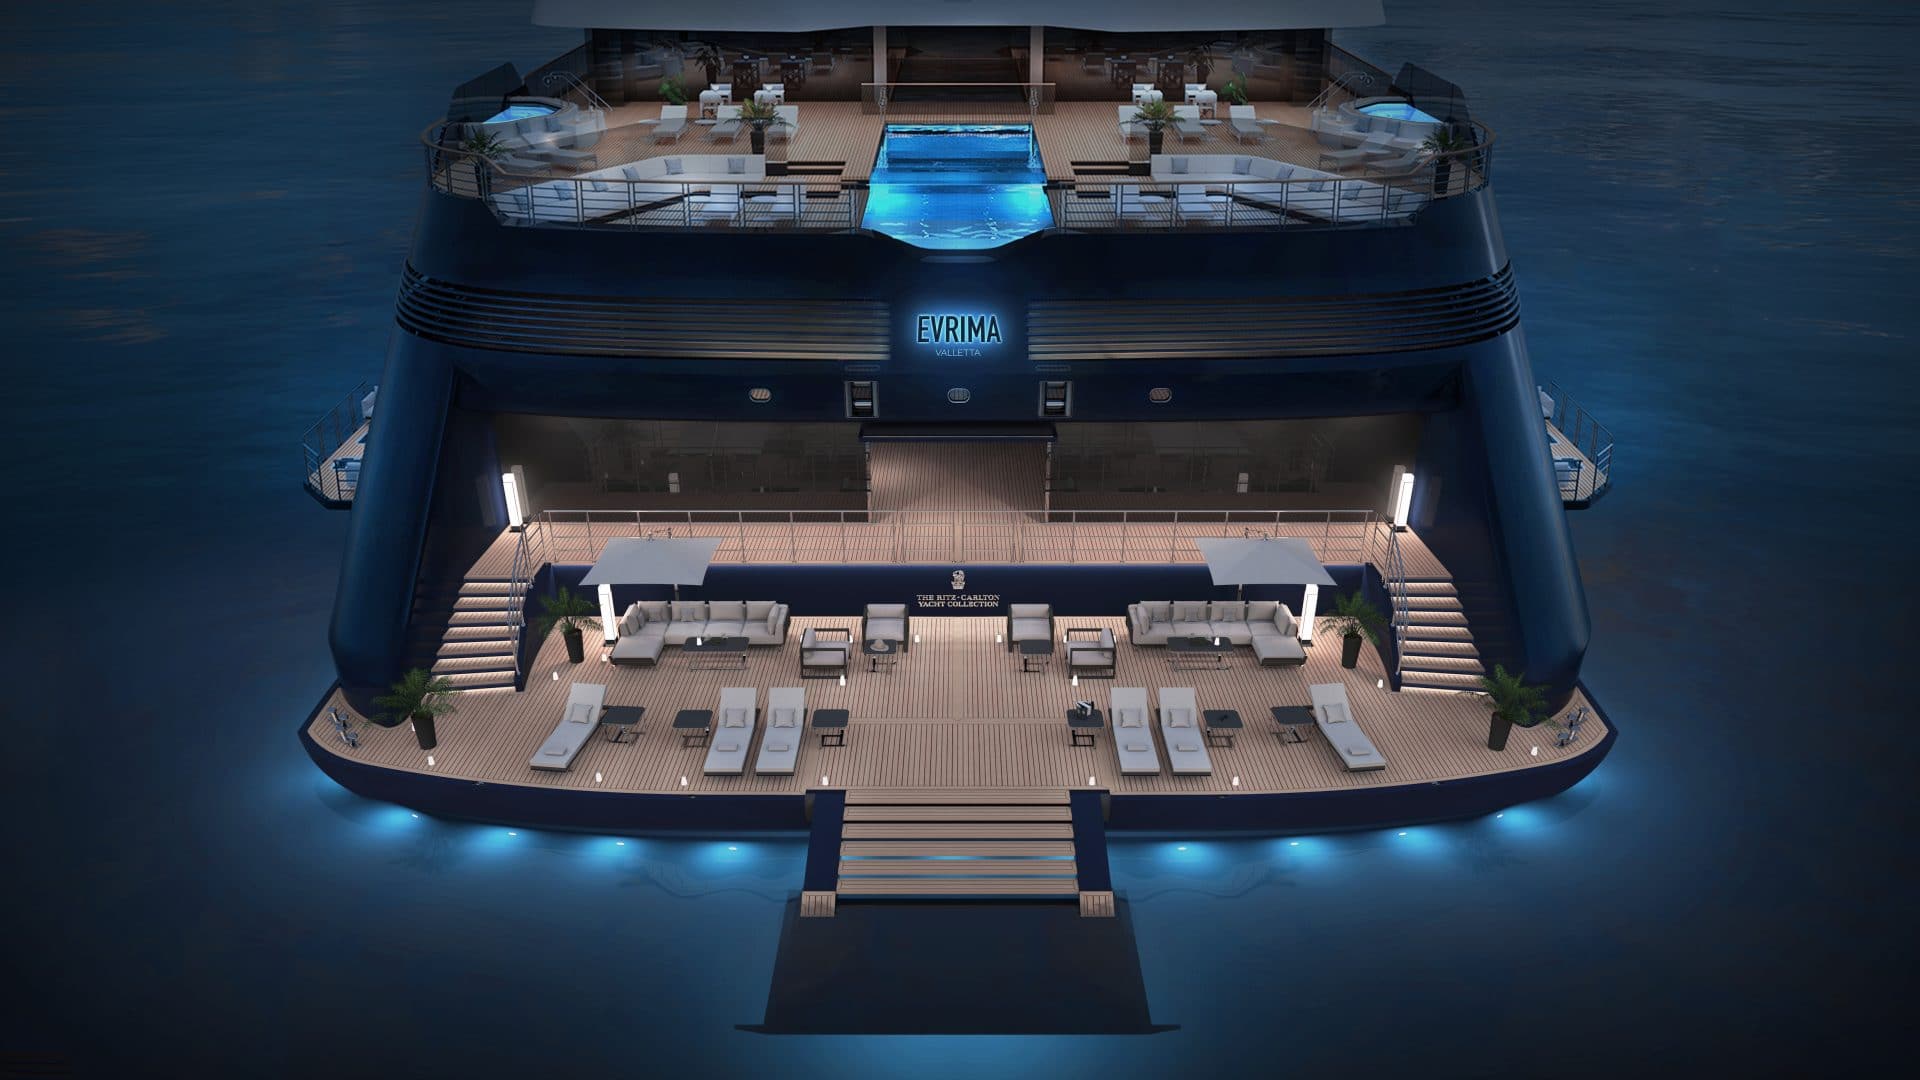 Ritz-Carlton Enters the Luxury Cruise Business With 3 Custom Yachts